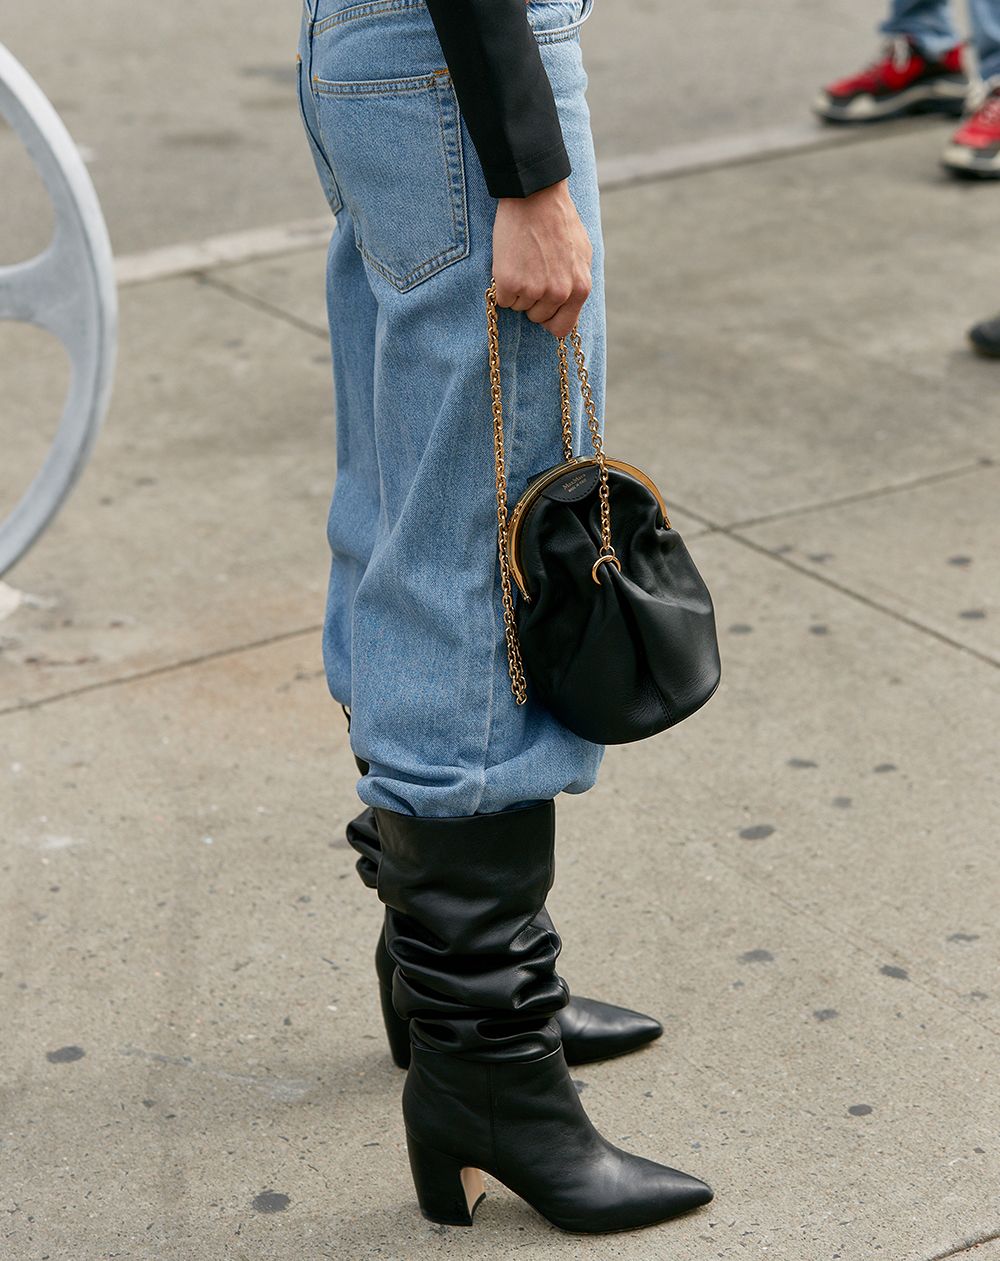 Knee-High Boots Are Massively Trending for 2019 | Who What Wear